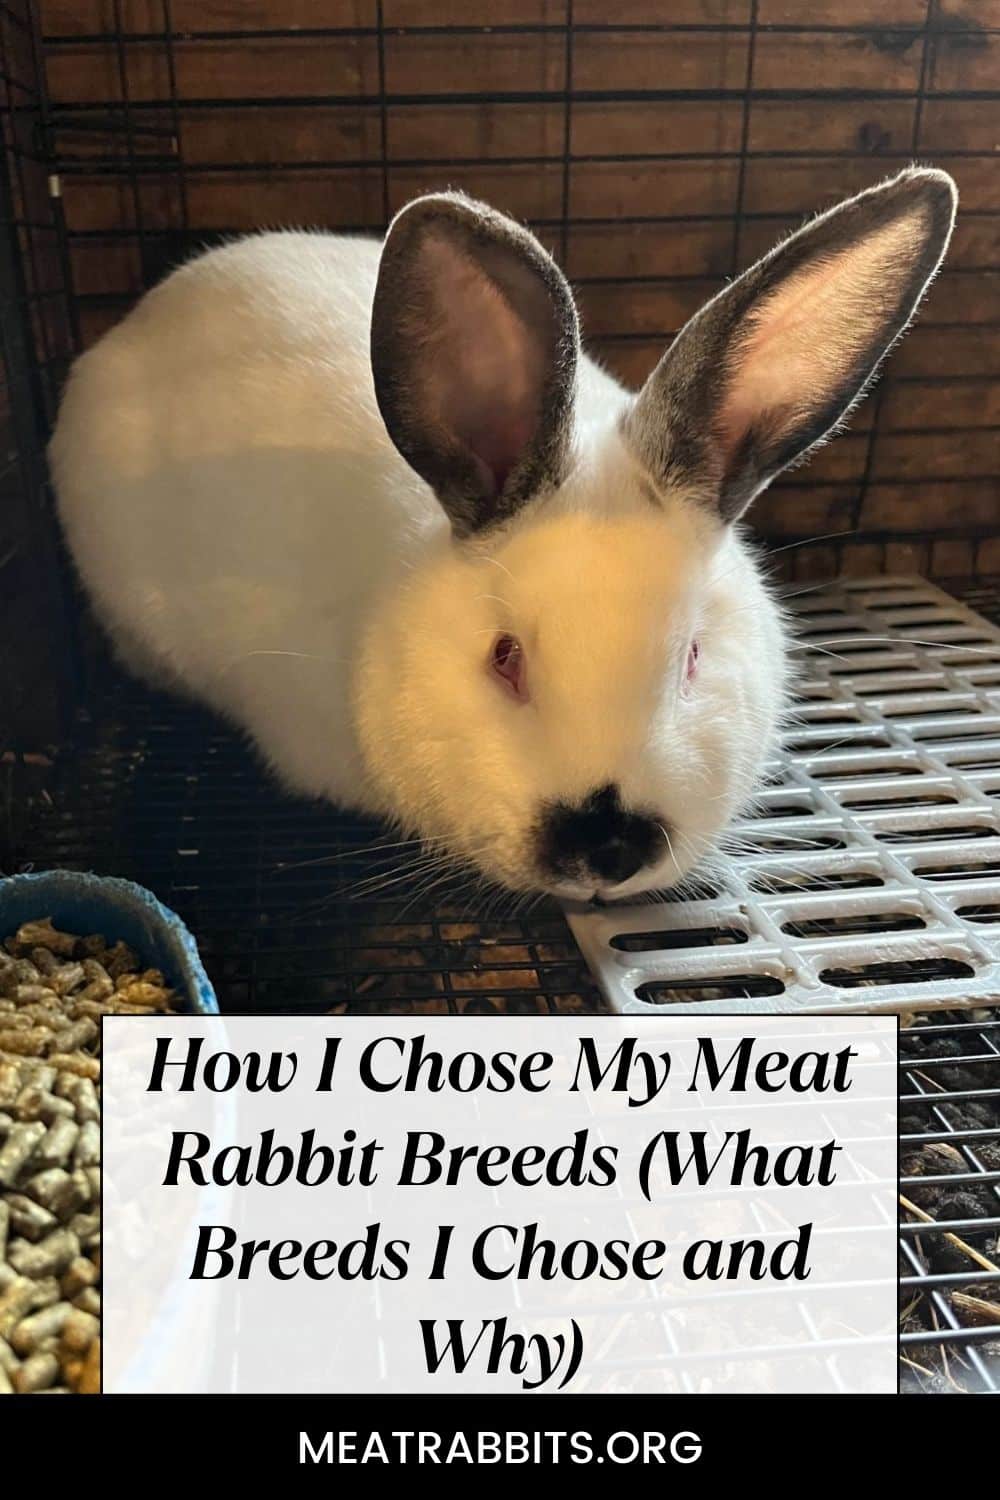 How I Chose My Meat Rabbit Breeds (What Breeds I Chose and Why) pinterest image.